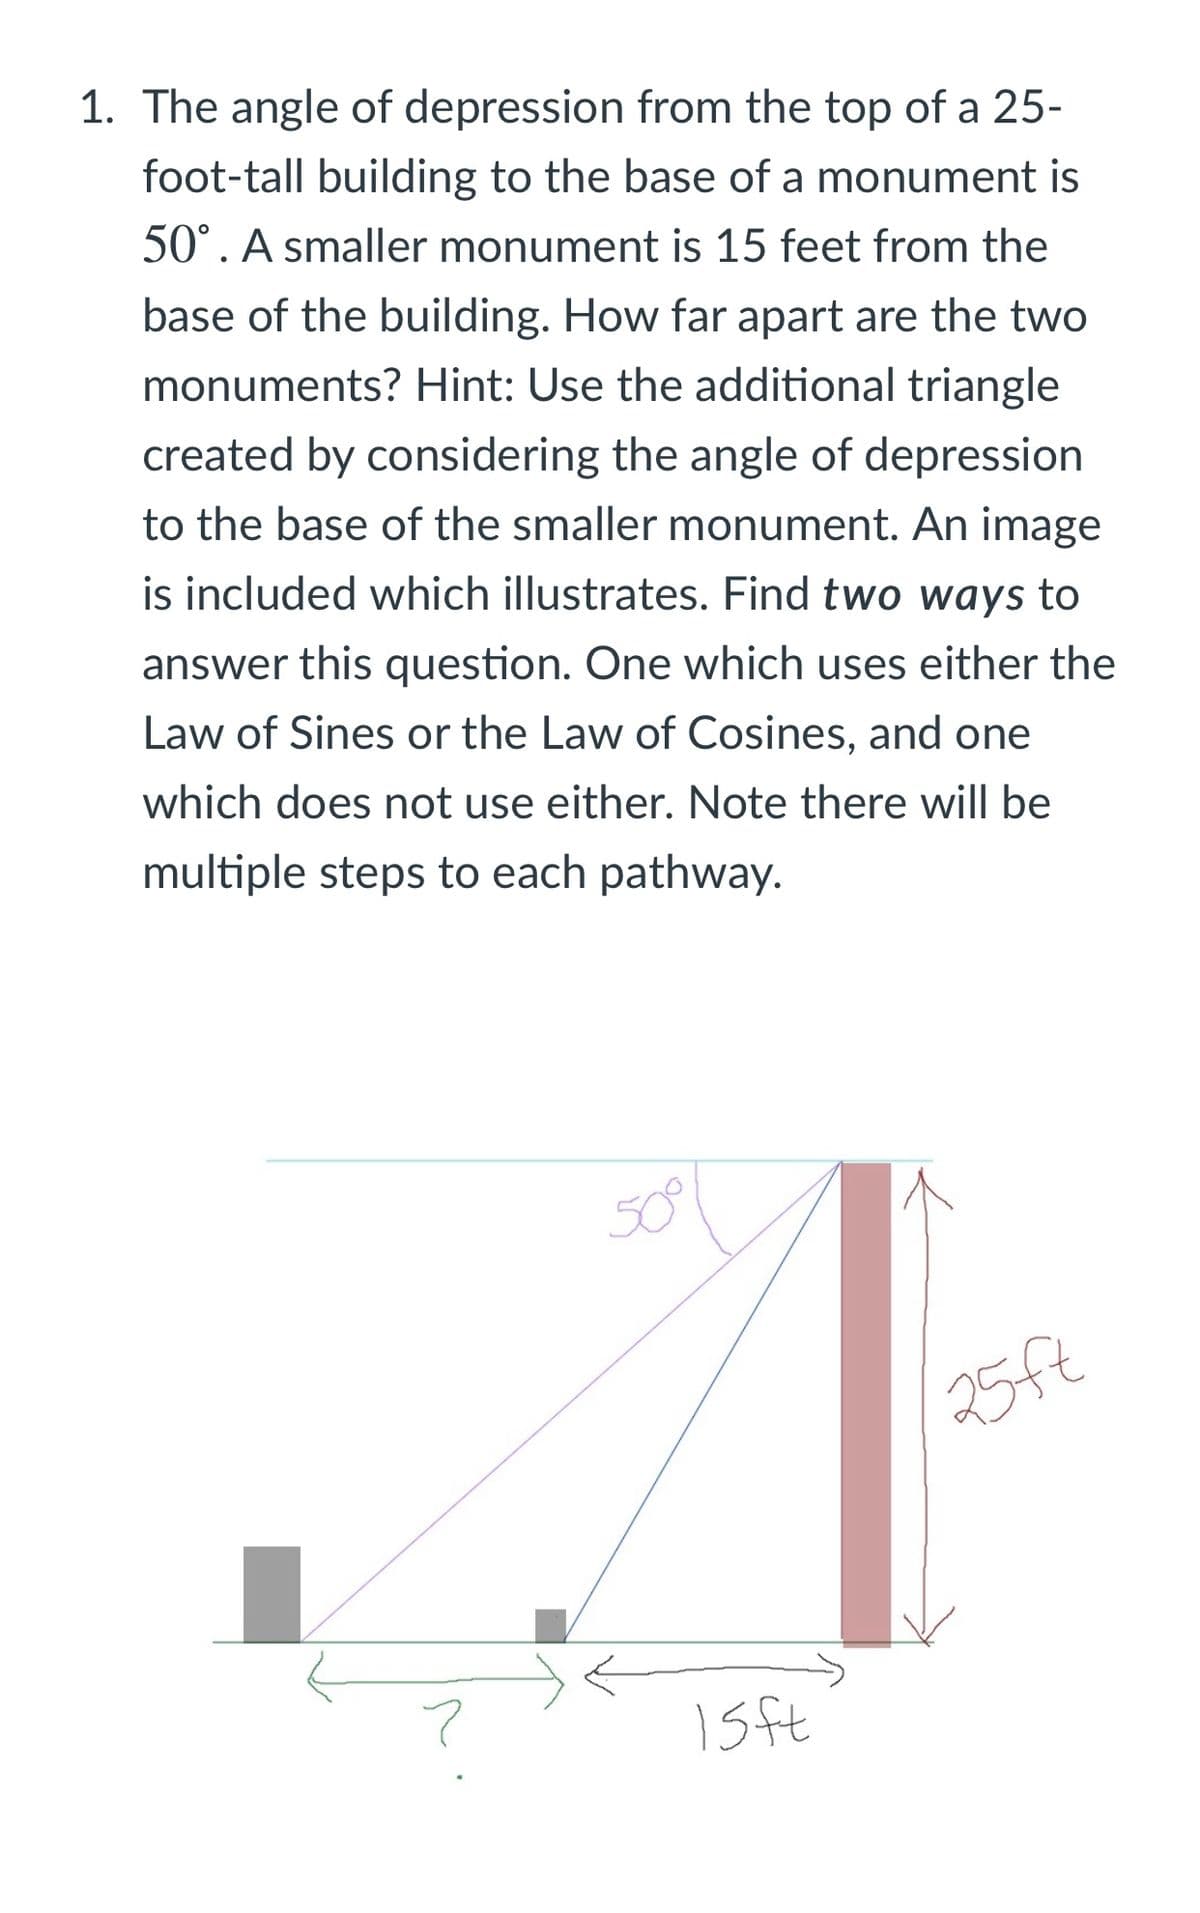 1. The angle of depression from the top of a 25-
foot-tall building to the base of a monument is
50°. A smaller monument is 15 feet from the
base of the building. How far apart are the two
monuments? Hint: Use the additional triangle
created by considering the angle of depression
to the base of the smaller monument. An image
is included which illustrates. Find two ways to
answer this question. One which uses either the
Law of Sines or the Law of Cosines, and one
which does not use either. Note there will| be
multiple steps to each pathway.
25ft
1sft
